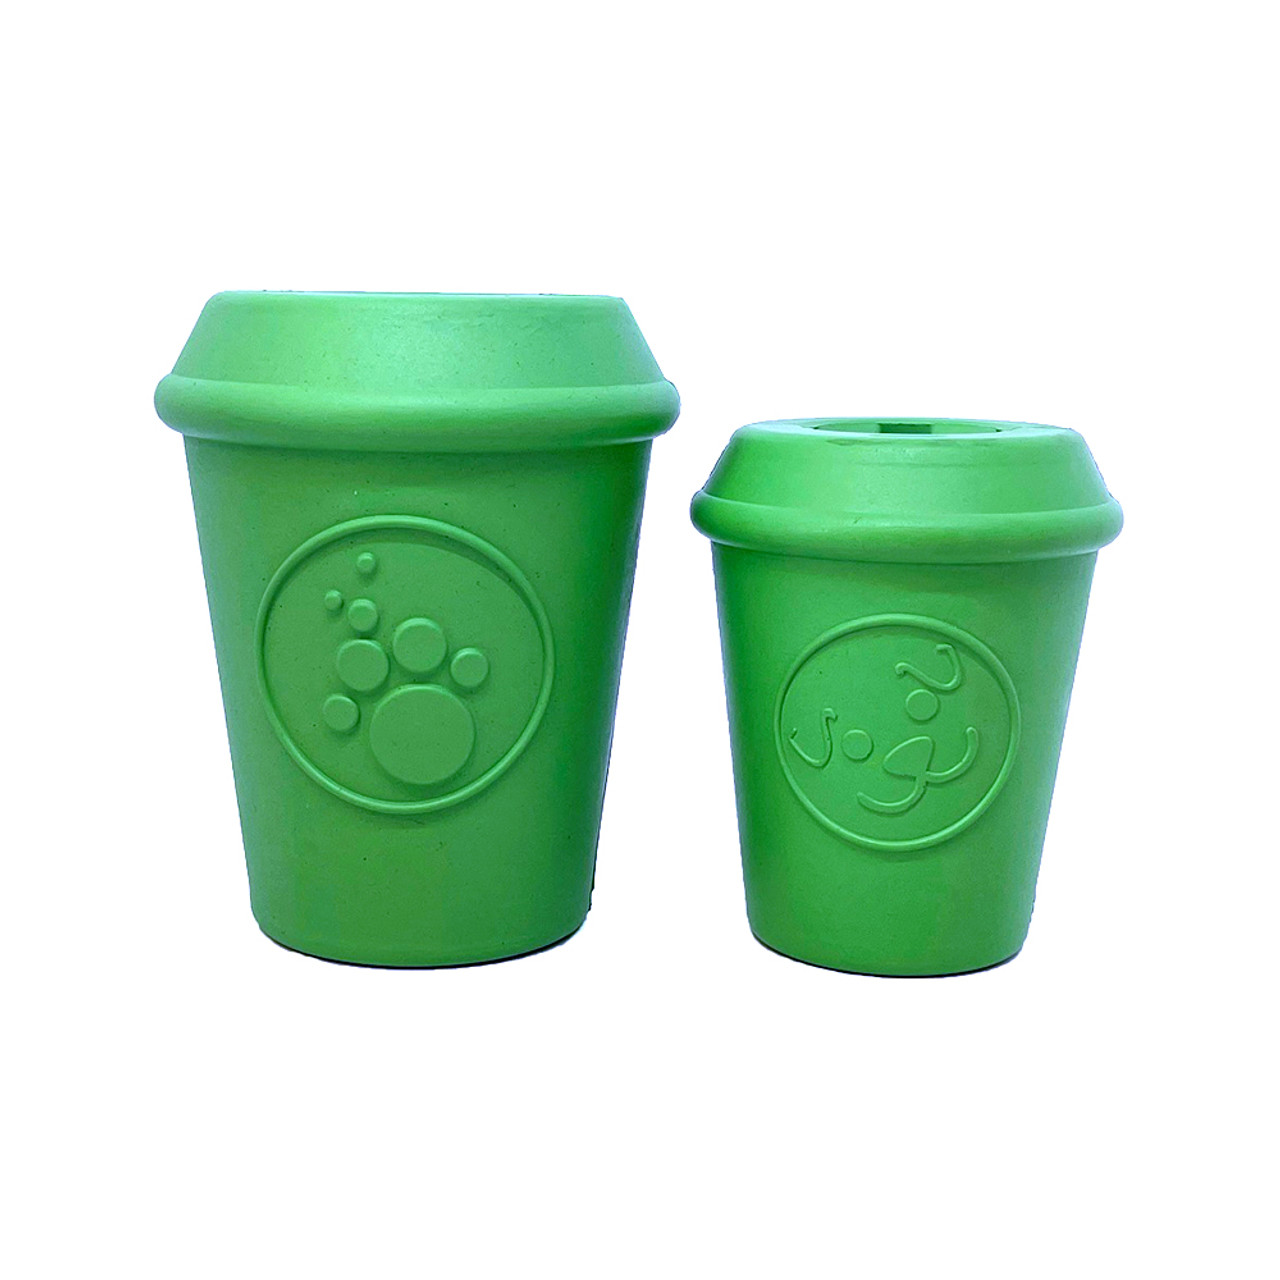 https://cdn11.bigcommerce.com/s-qfetj9wx4u/images/stencil/1280x1280/products/210/713/Poko-and-Oki-SodaPup-Coffee-Cup-Rubber-Chew-Toy-Treat-Dispenser-01__46518.1658772482.jpg?c=1